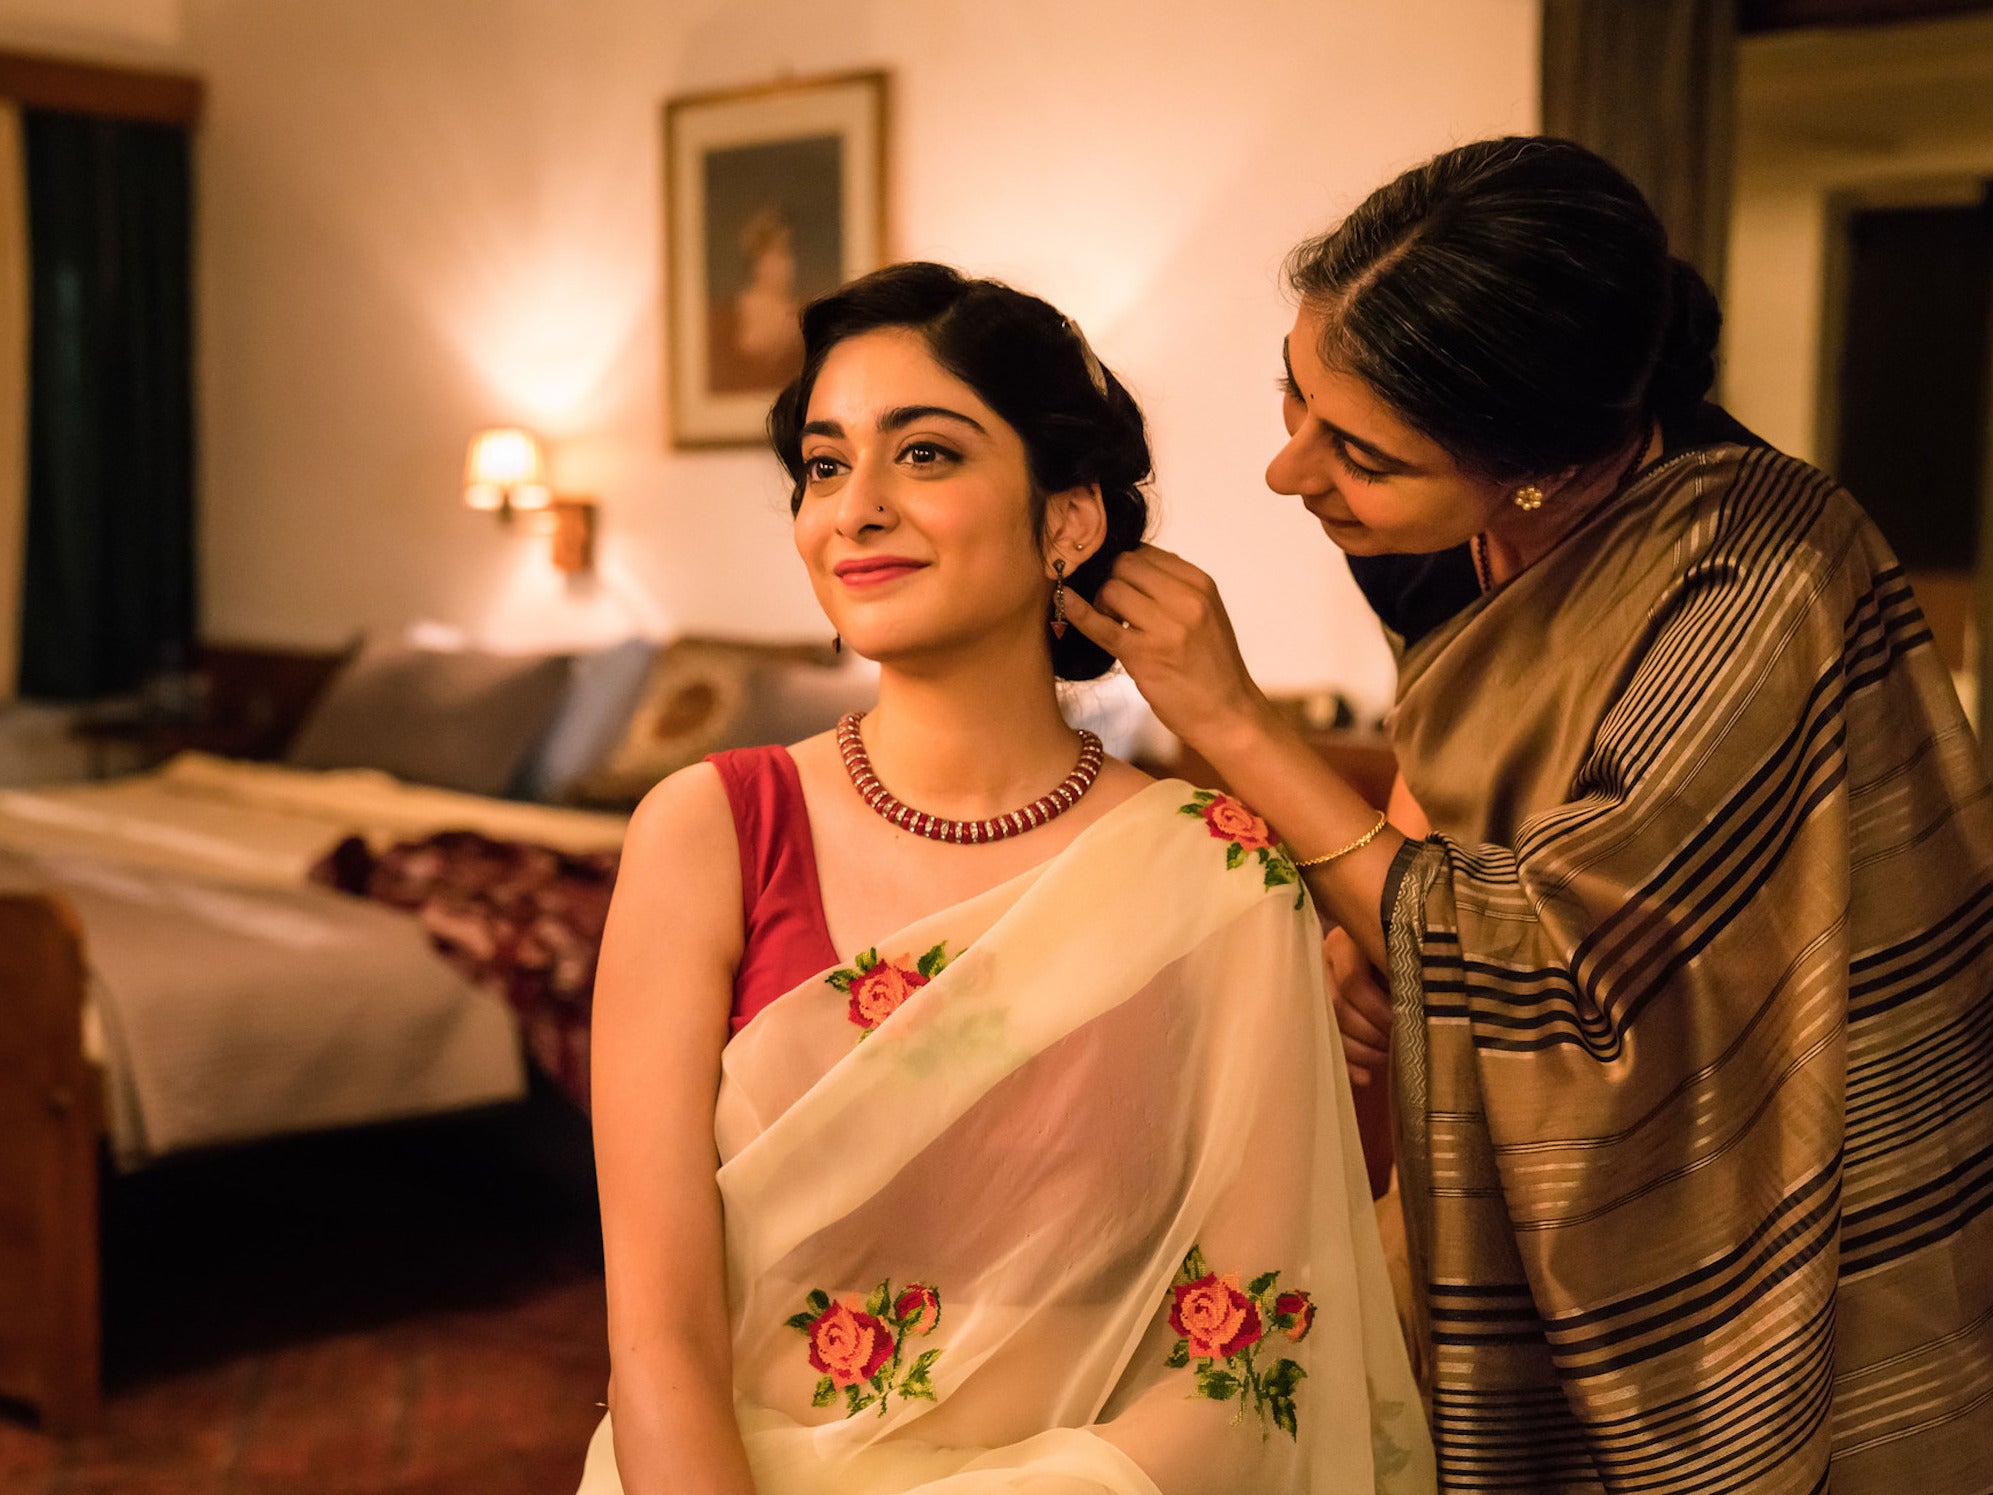 We have only seen glimpses of Indian culture Why A Suitable Boy is a milestone for Asian representation The Independent The Independent